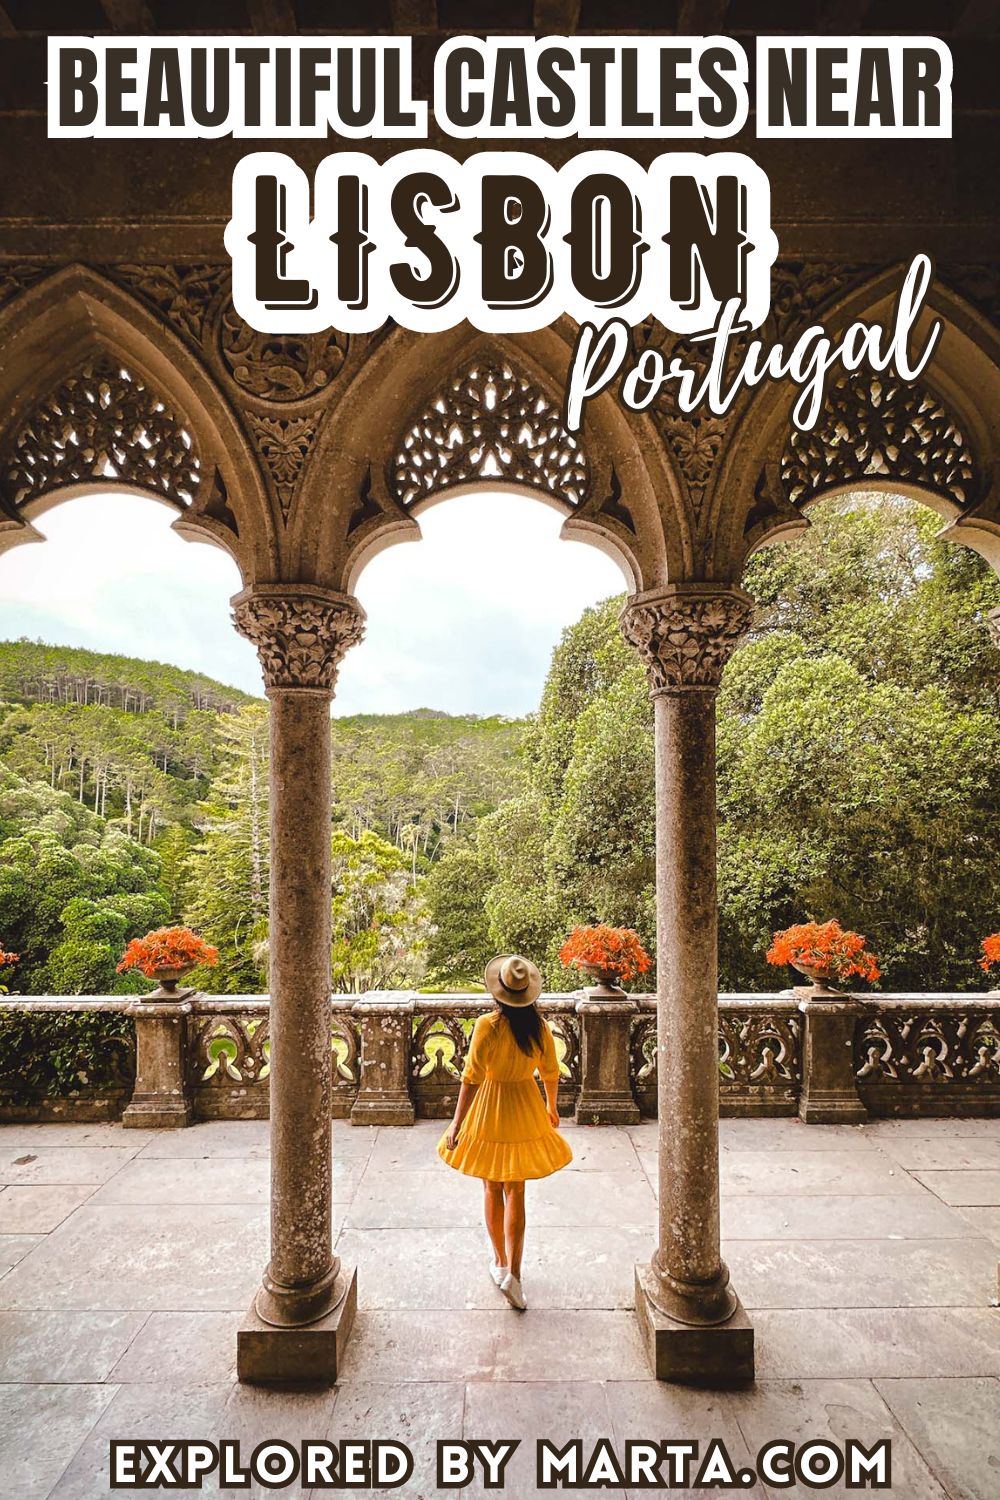 Stunning palaces and castles near Lisbon, Portugal